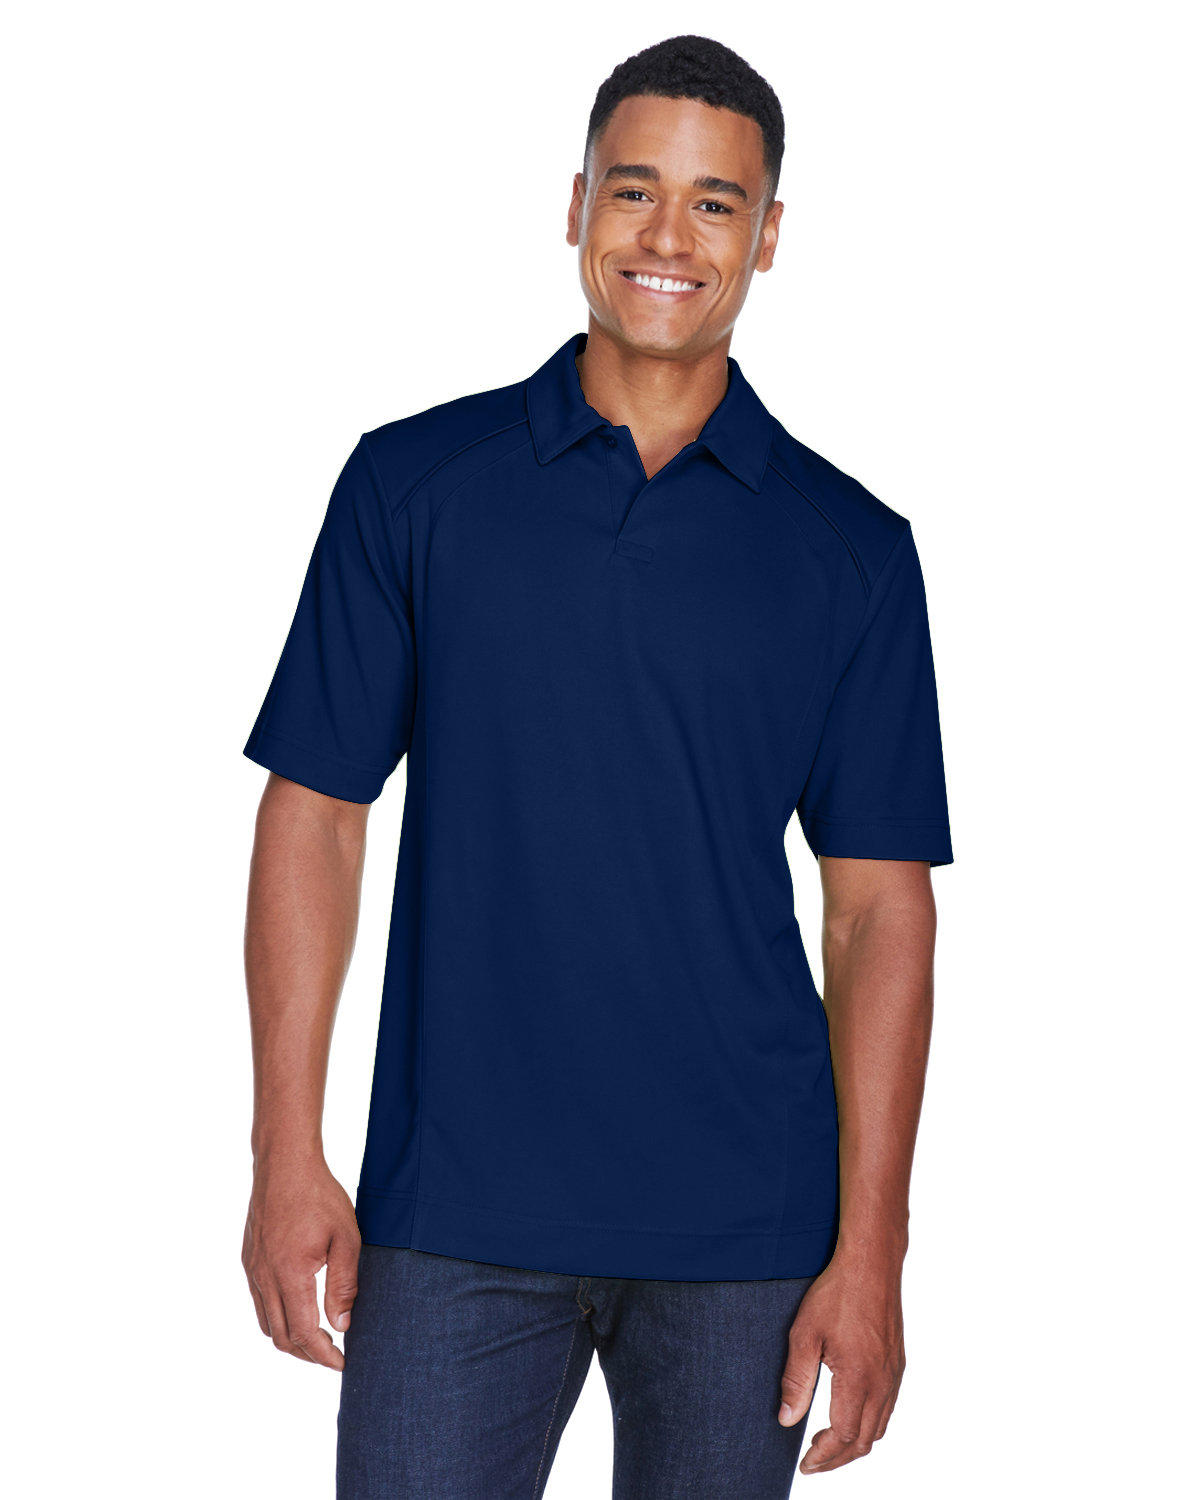 North End Men's Recycled Polyester Performance Piqué Polo NIGHT 